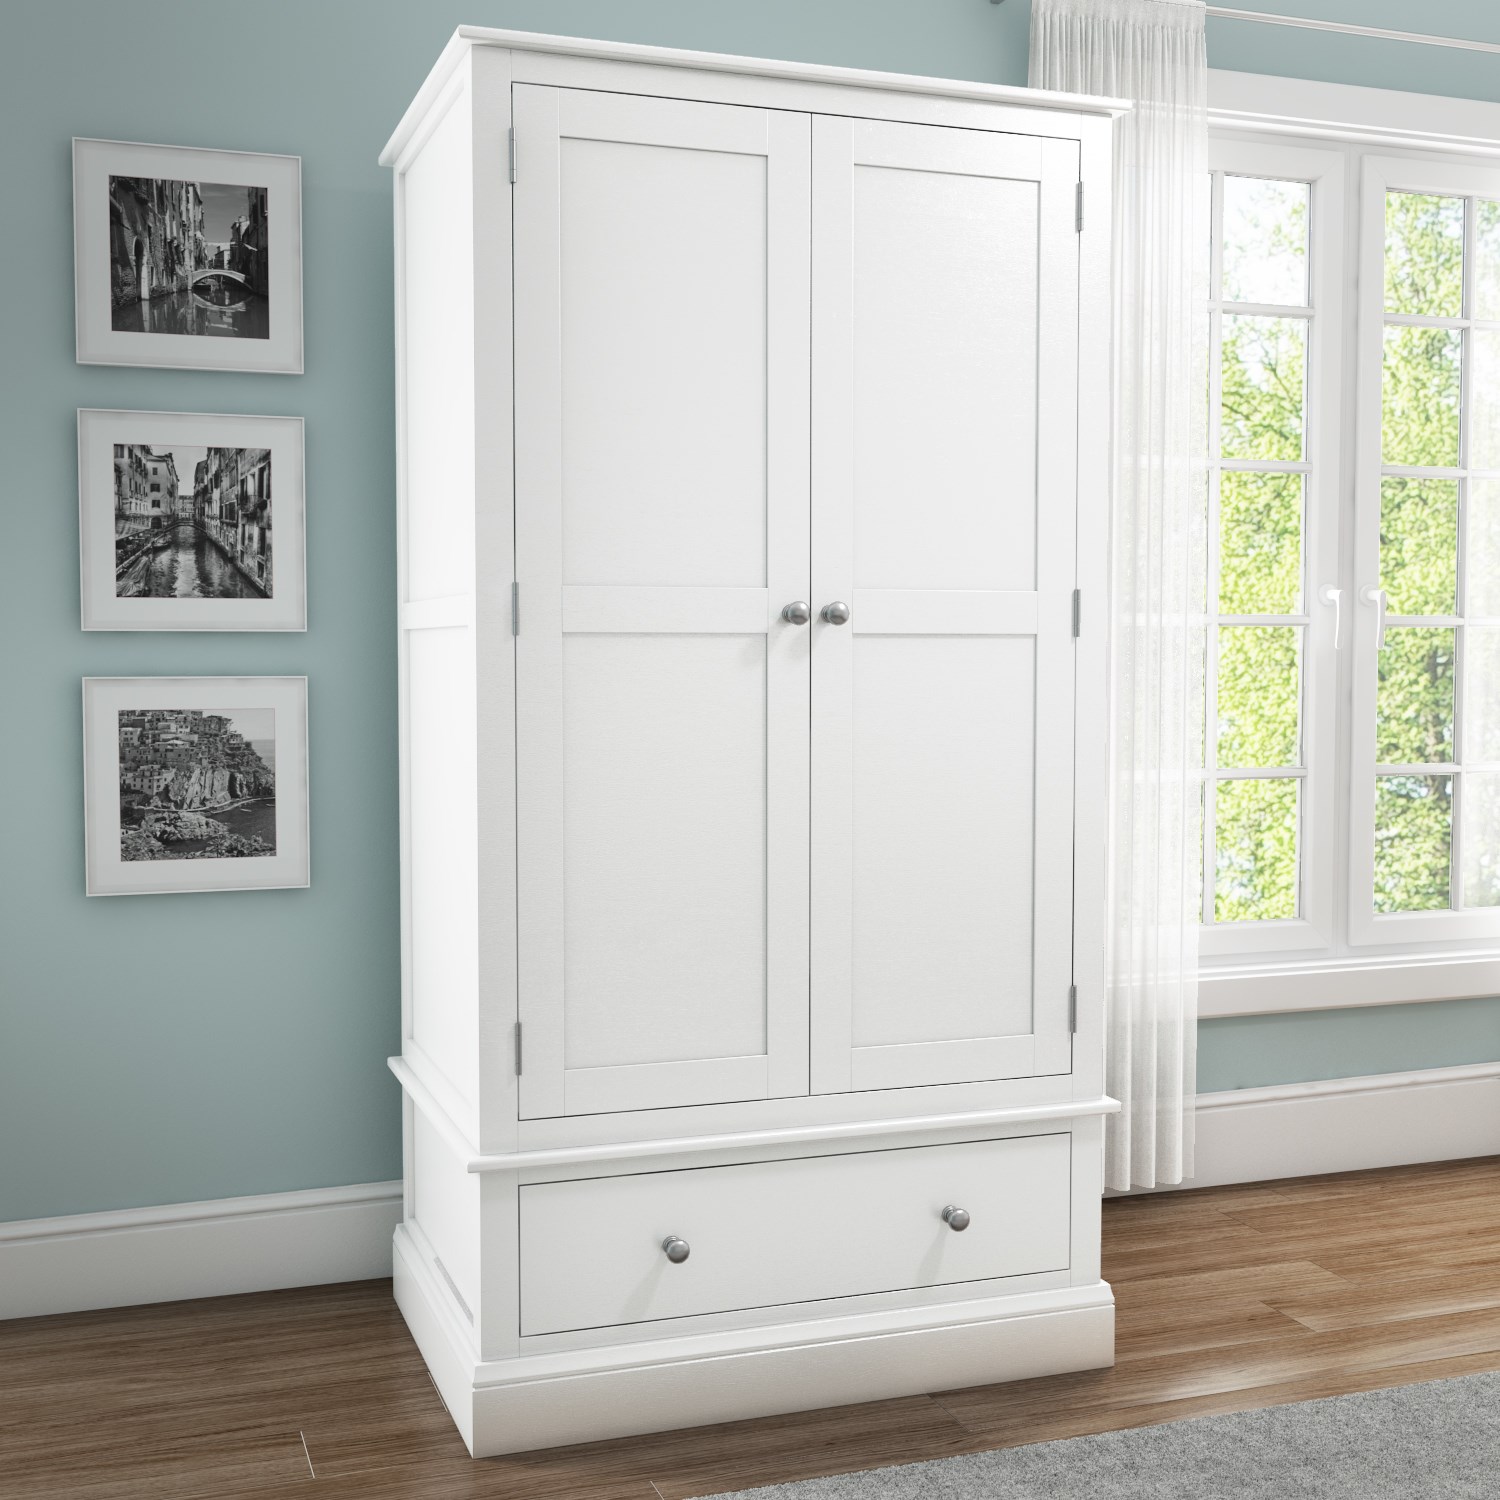 White Wardrobes – A Classy Storage at Your Home